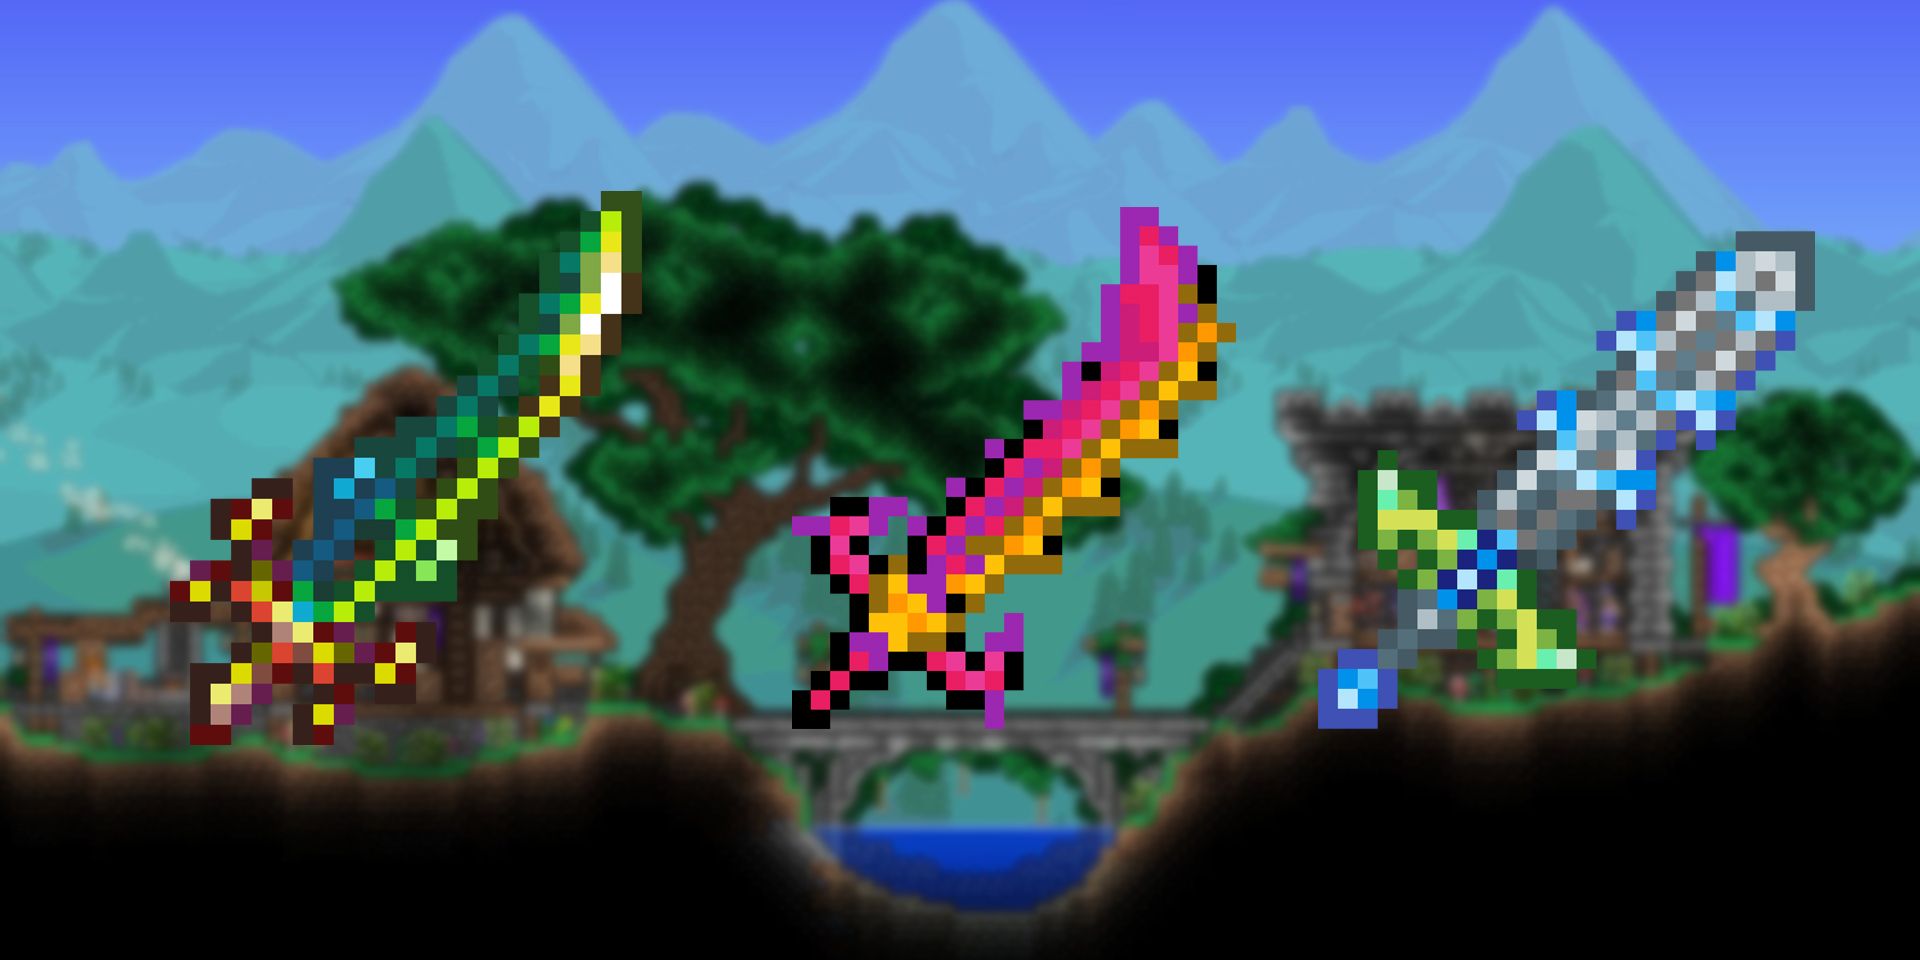 terraria swords from best to worst